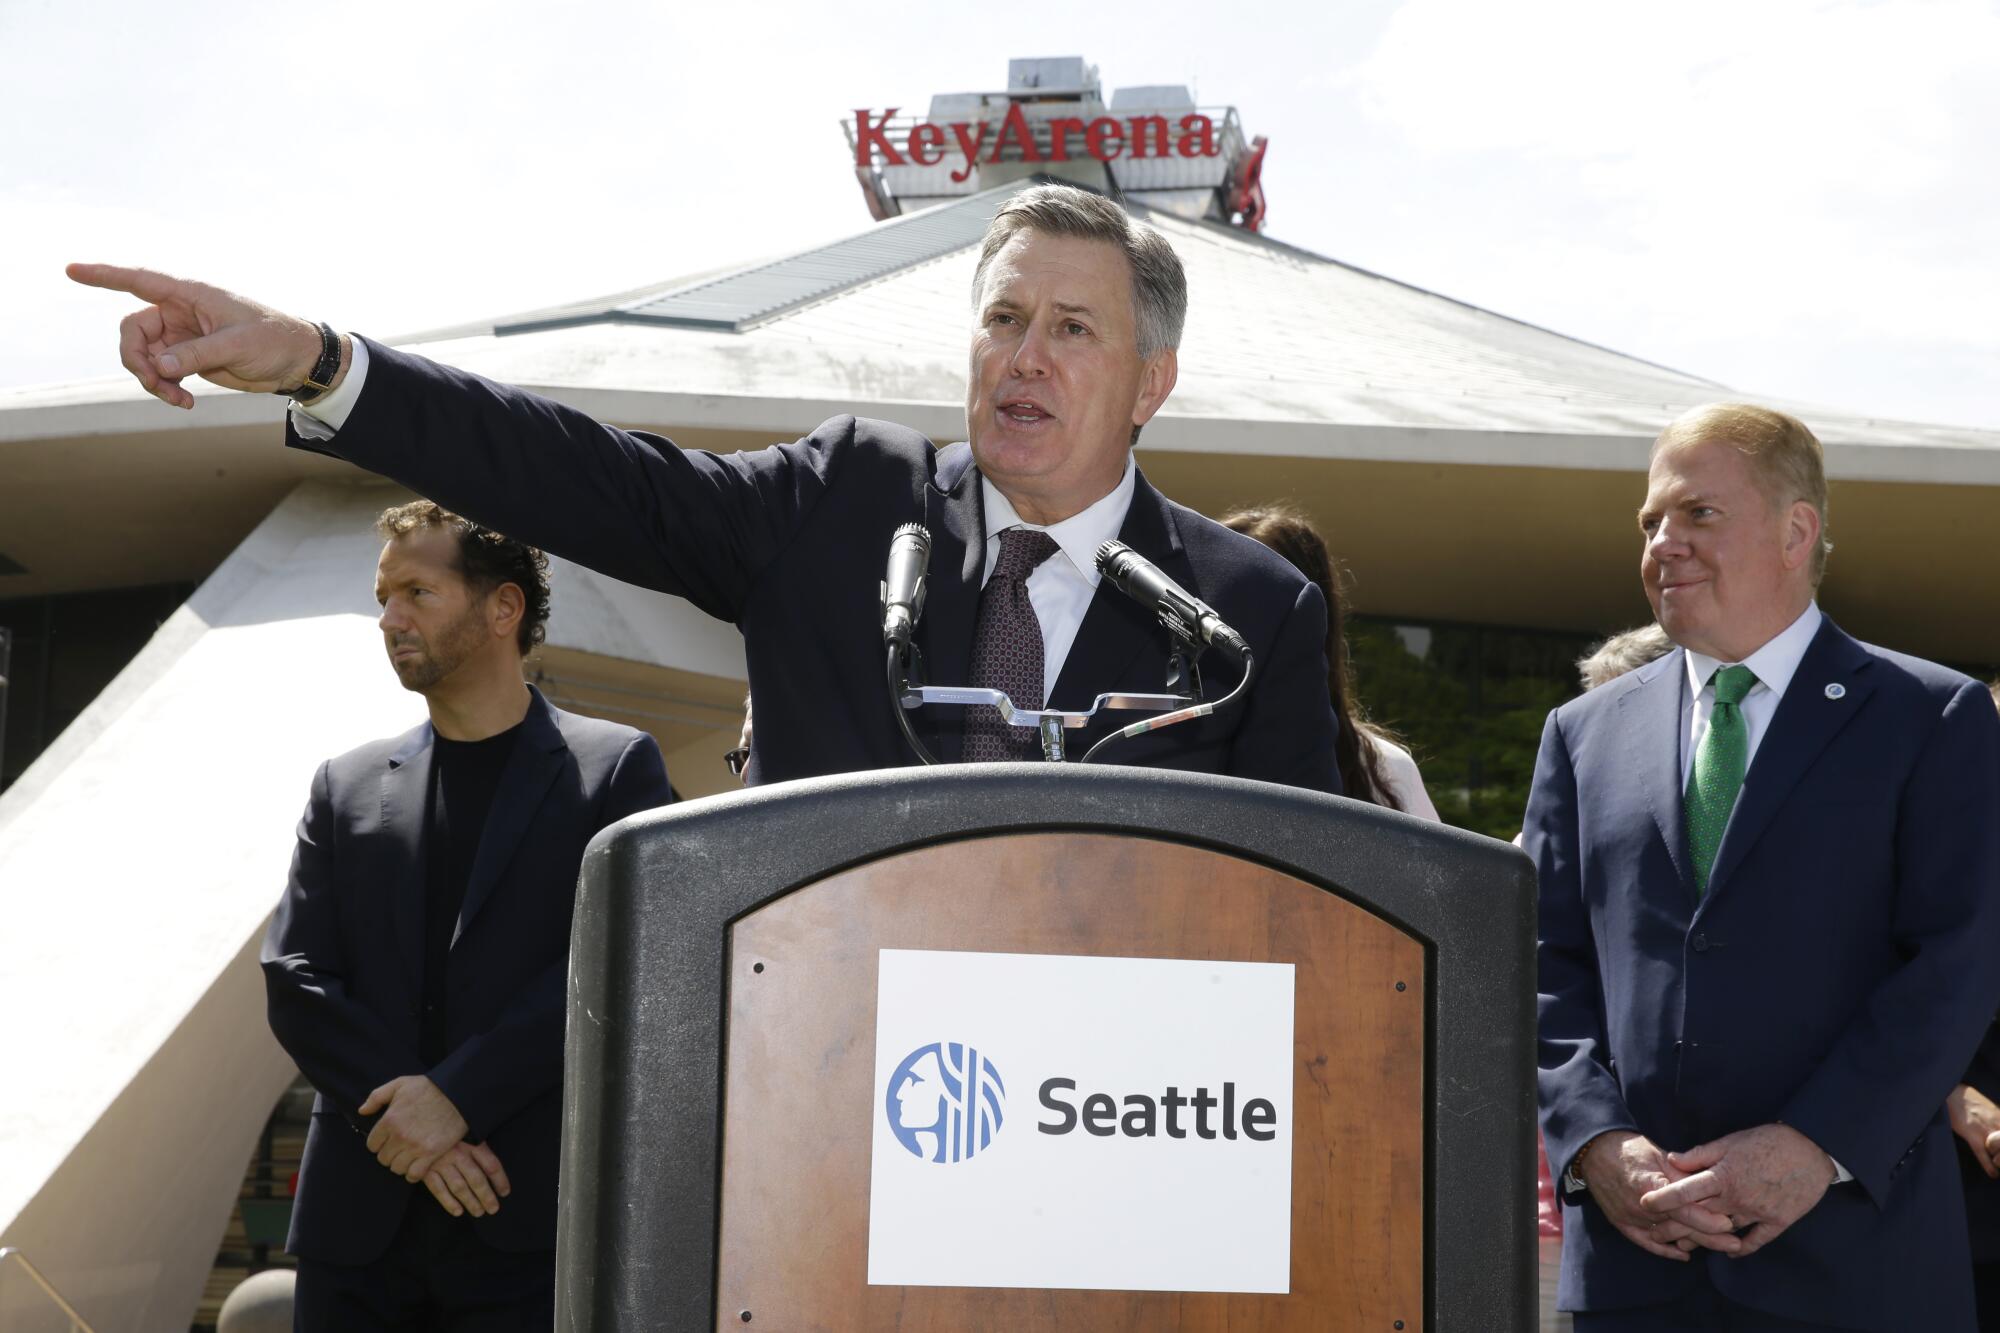 Tim Leiweke speaks at a news conference in front of the old Key Arena in Seattle.